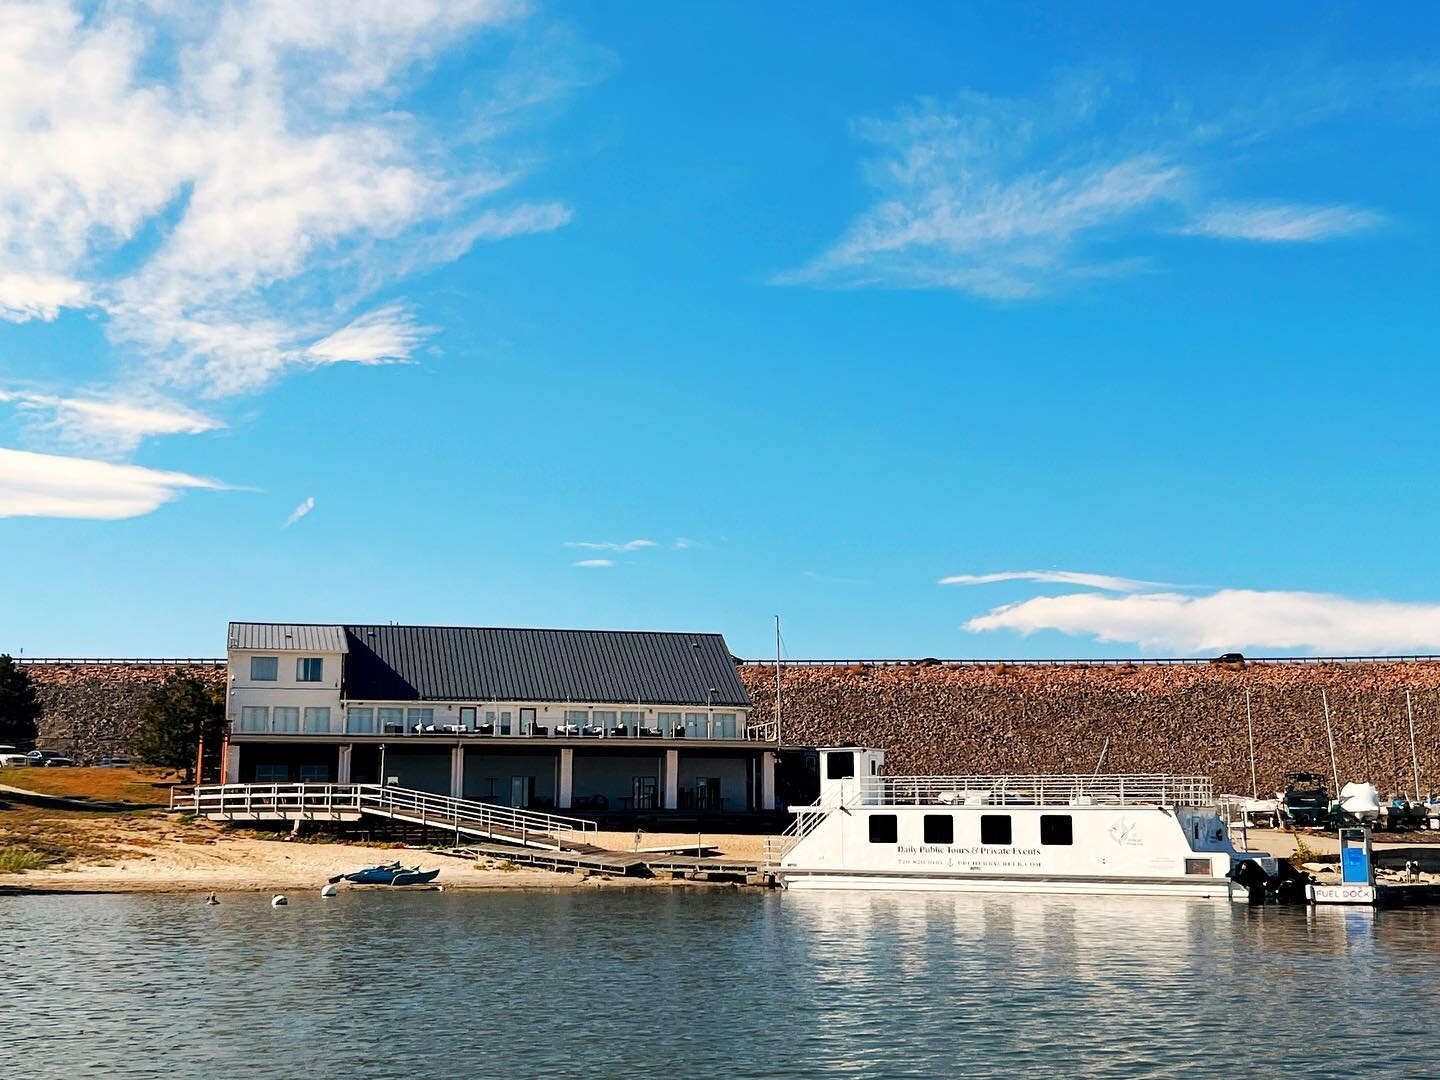 The Lake House at Cherry Creek is a one-of-a-kind waterfront venue in the Denver metro area. It offers an intimate, modern, multi-purpose event space for up to 400 people.

#lakehouse 
#eventvenues 
#weddingplanning 
#lakelife 
#cherrycreekdenver 
#e